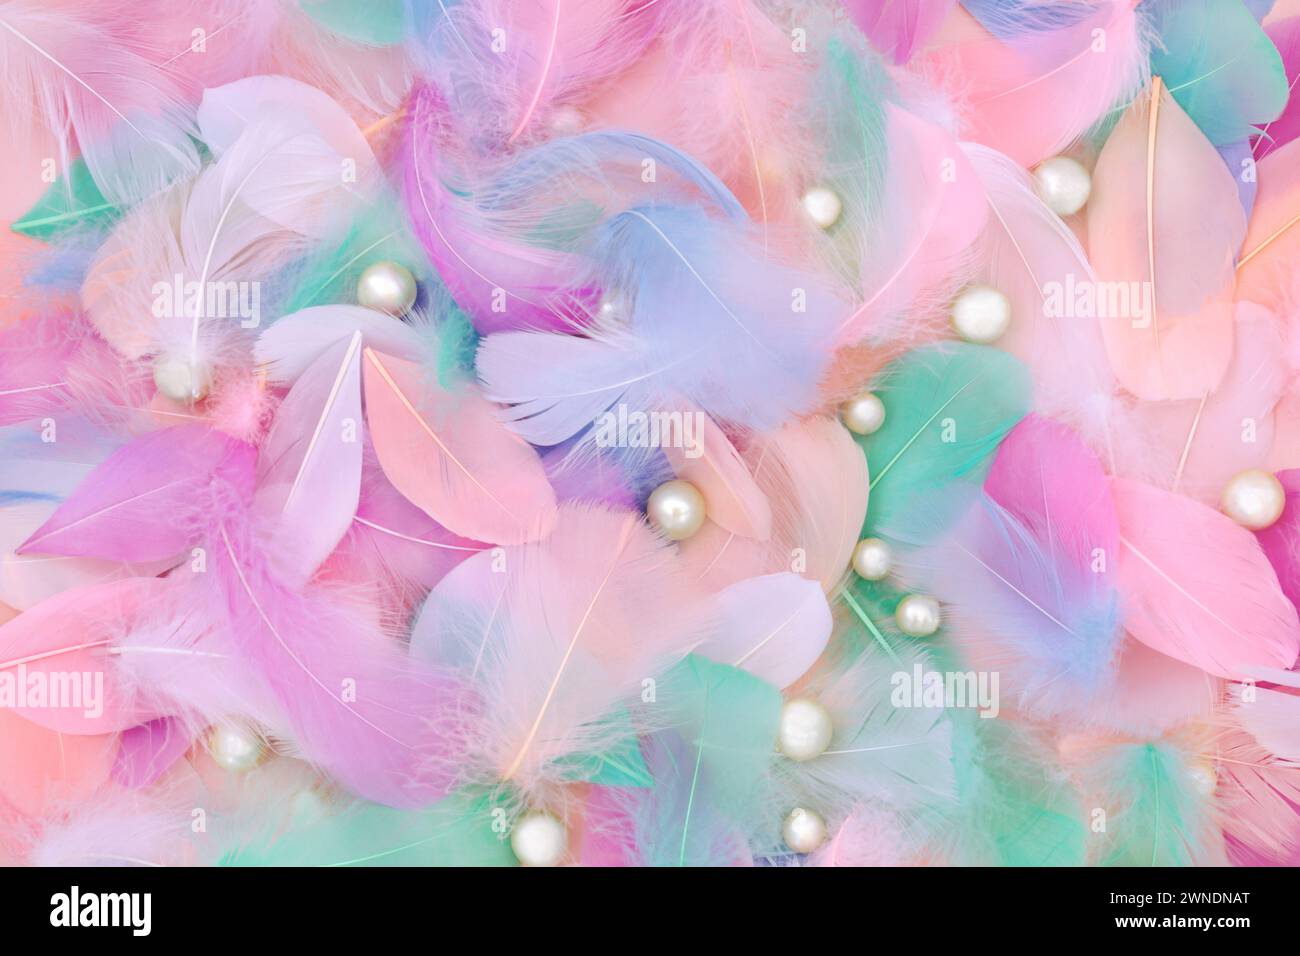 Feather and oyster pearl abstract colorful background. Soft natural nature feminine composition. Stock Photo